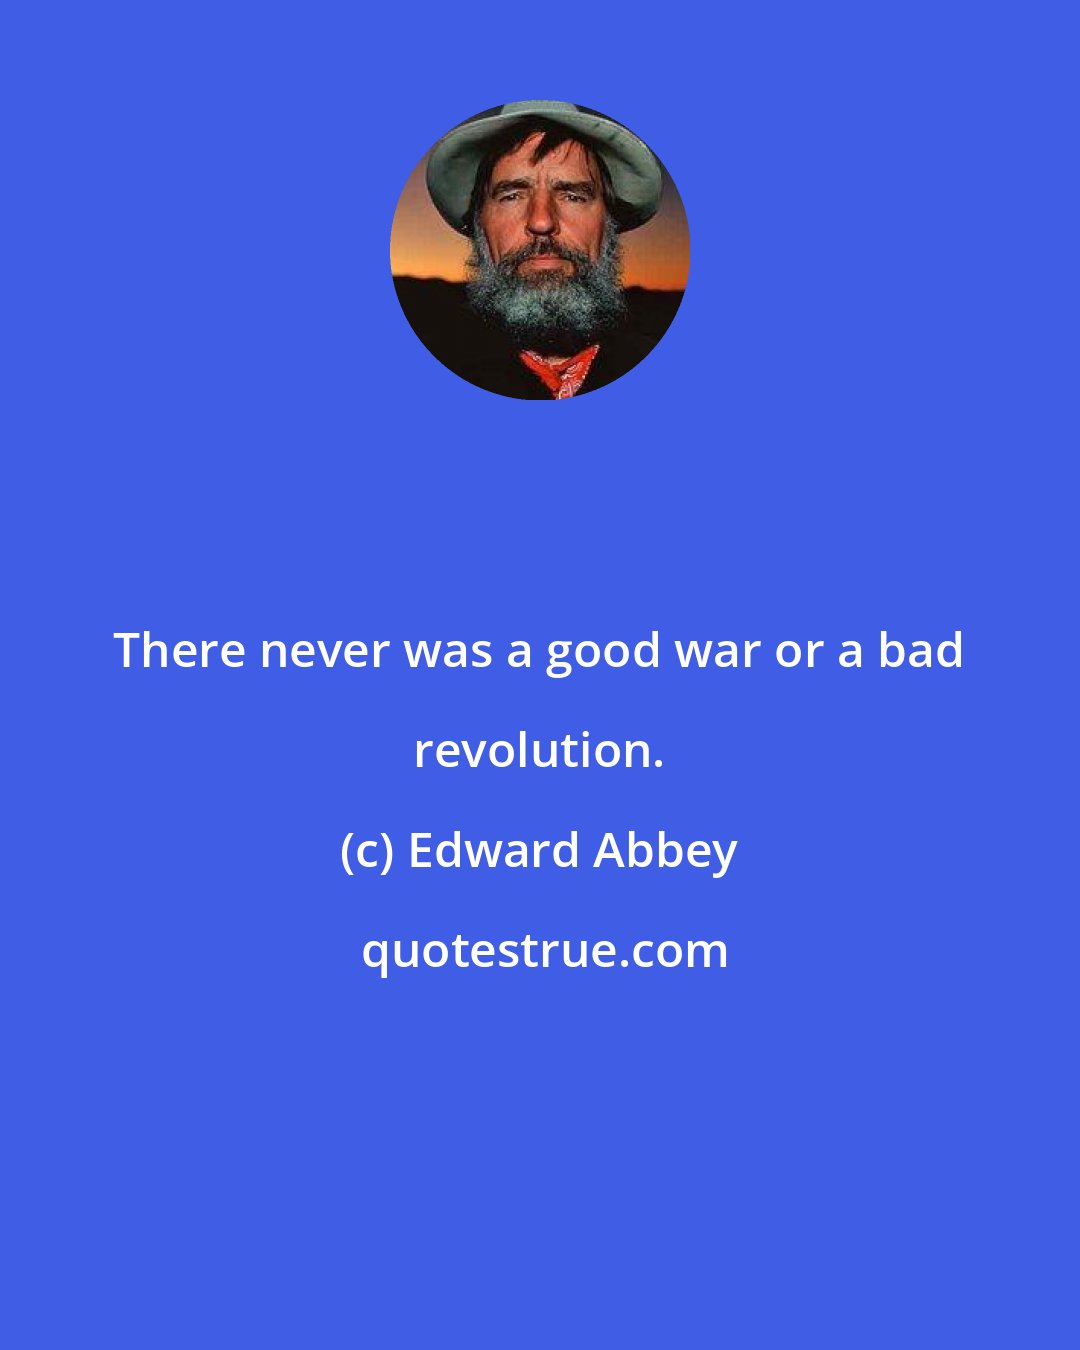 Edward Abbey: There never was a good war or a bad revolution.